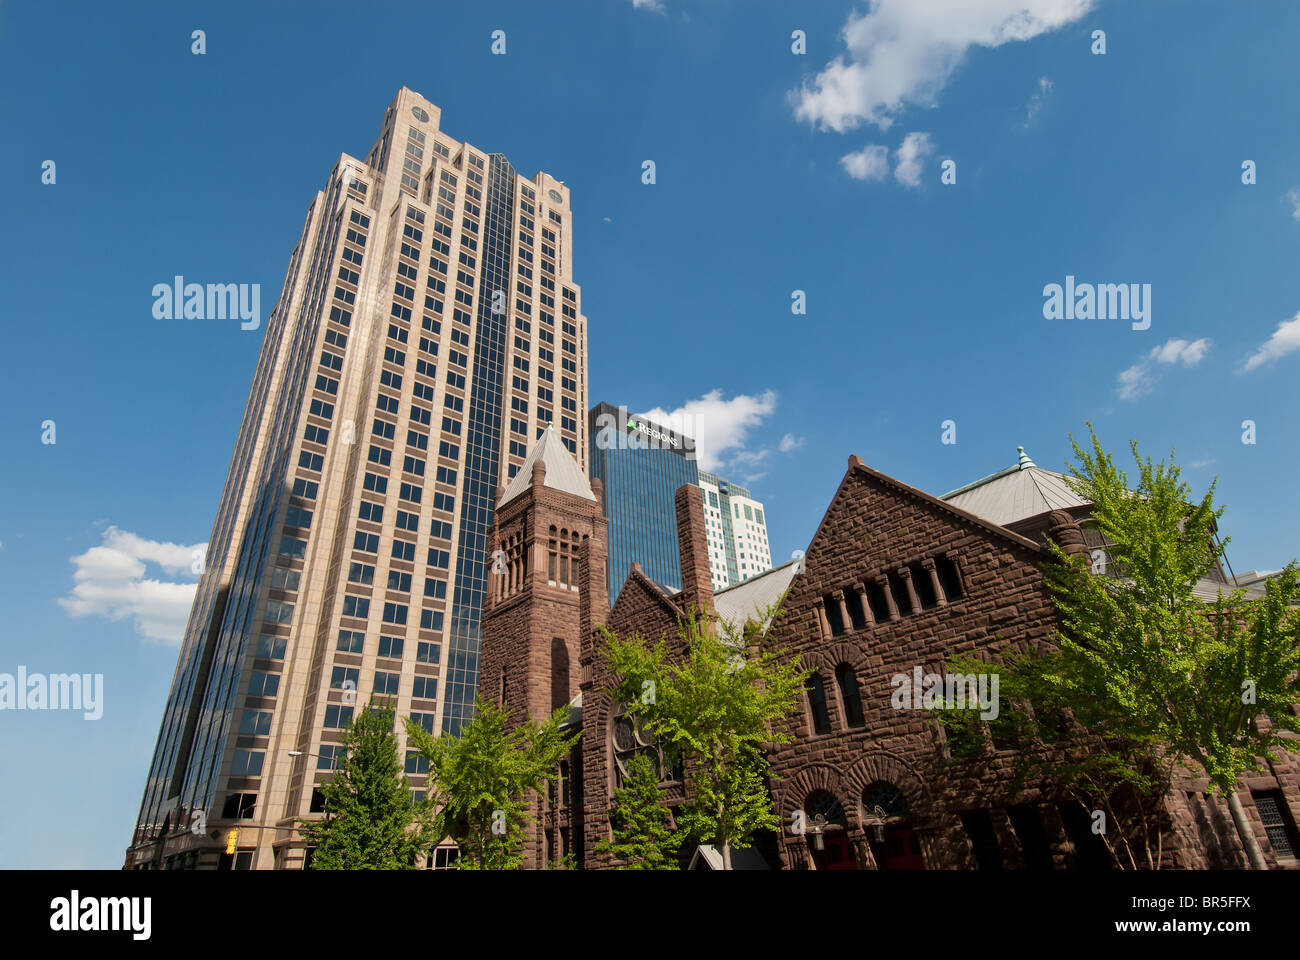 First United Methodist Church, built 1891, dwarfed by financial office towers in the city center of Birmingham, Alabama, USA Stock Photo